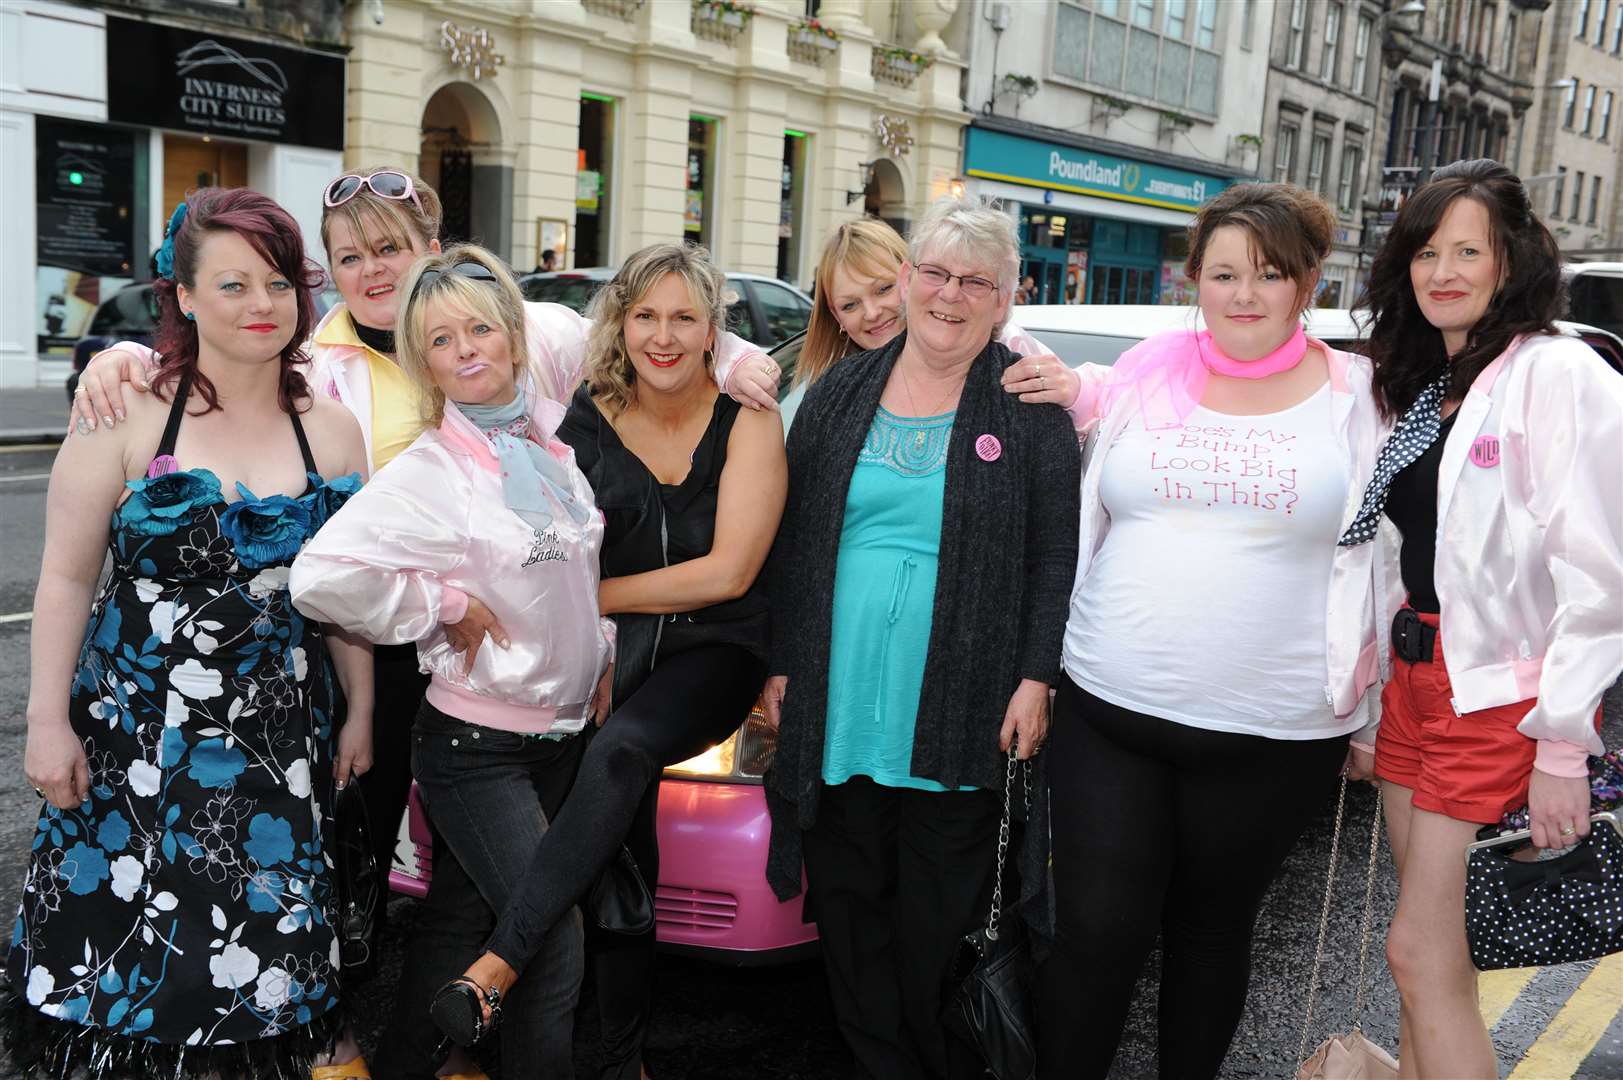 Mandy Bunce (4th left) celebrates her 40th birthday on a Grease theme with pink limo with friends and family.